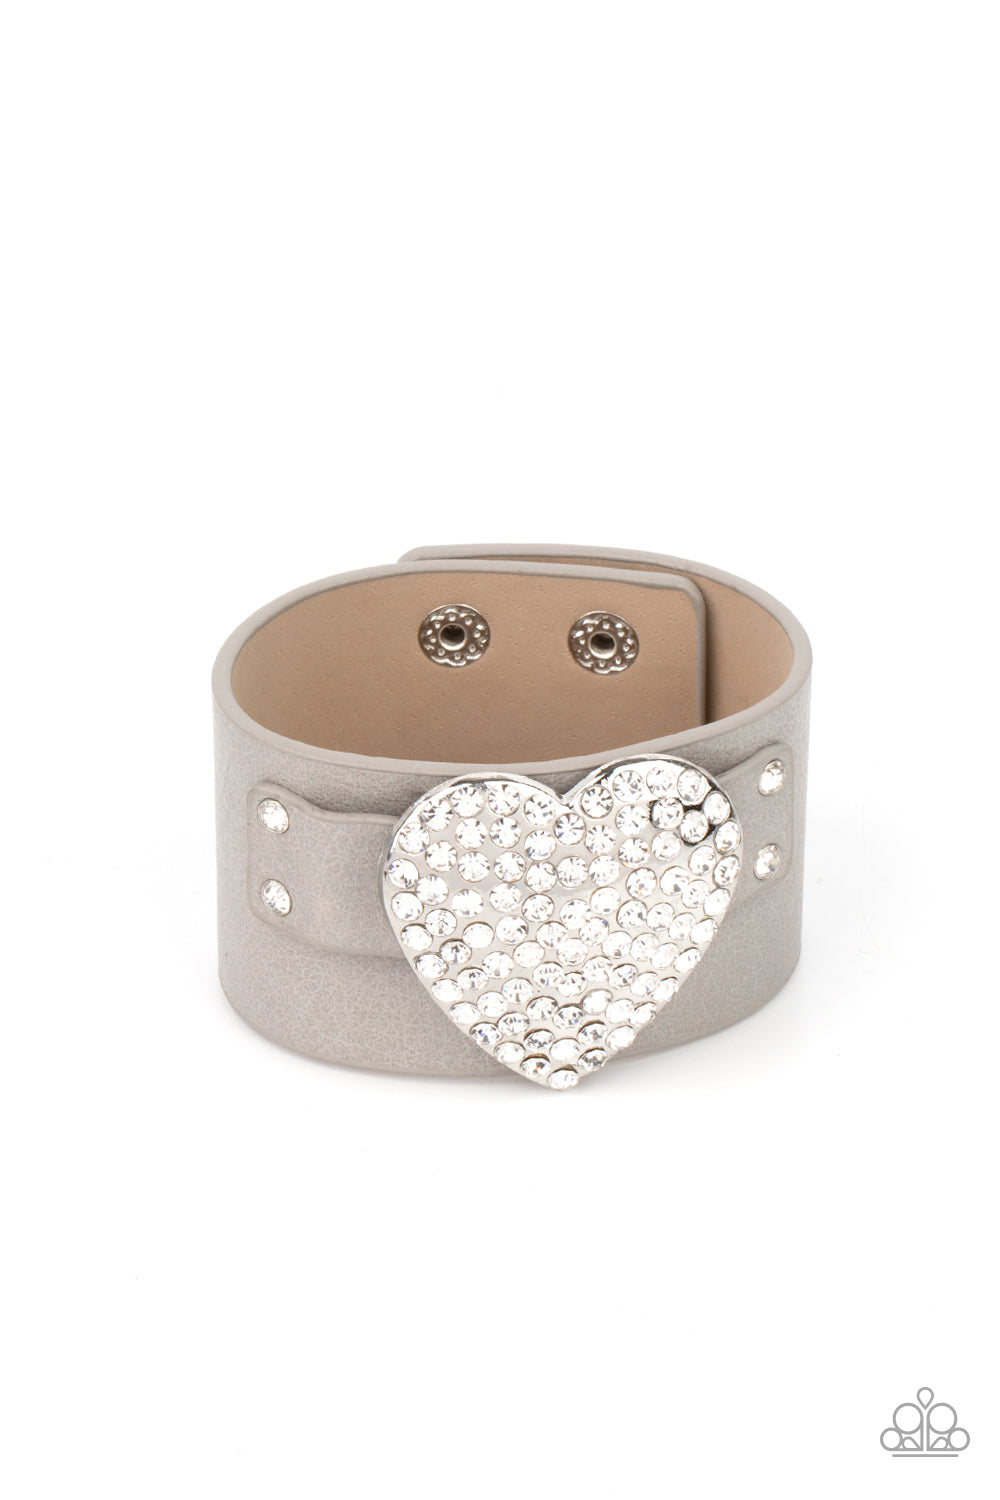 Flauntable Flirt - Silver Bracelets encrusted in blinding white rhinestones, an oversized silver heart frame is studded in place across the front of a gray leather band, creating a flirtatious centerpiece around the wrist. Features an adjustable snap closure.  Sold as one individual bracelet.  Paparazzi Jewelry is lead and nickel free so it's perfect for sensitive skin too!